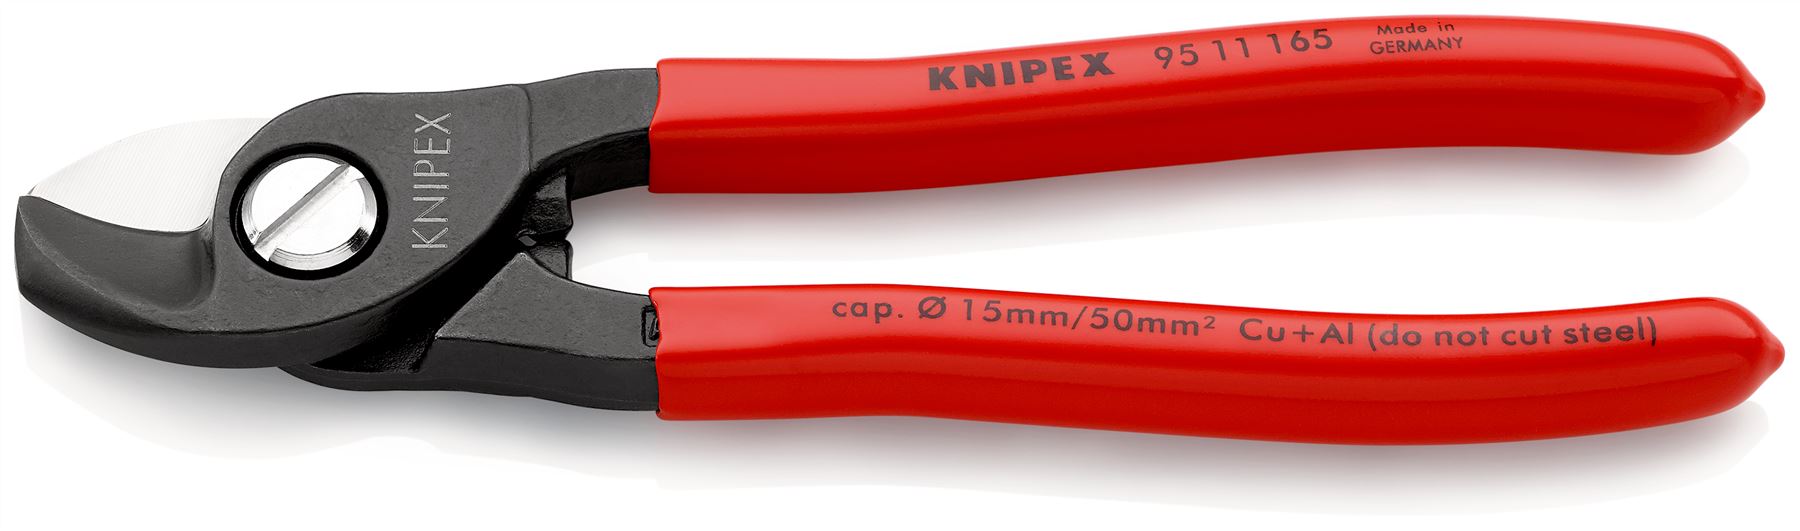 KNIPEX Cable Shears Cutting Pliers Cuts Cable up to 15mm Diameter 165mm Plastic Coated Handles 95 11 165